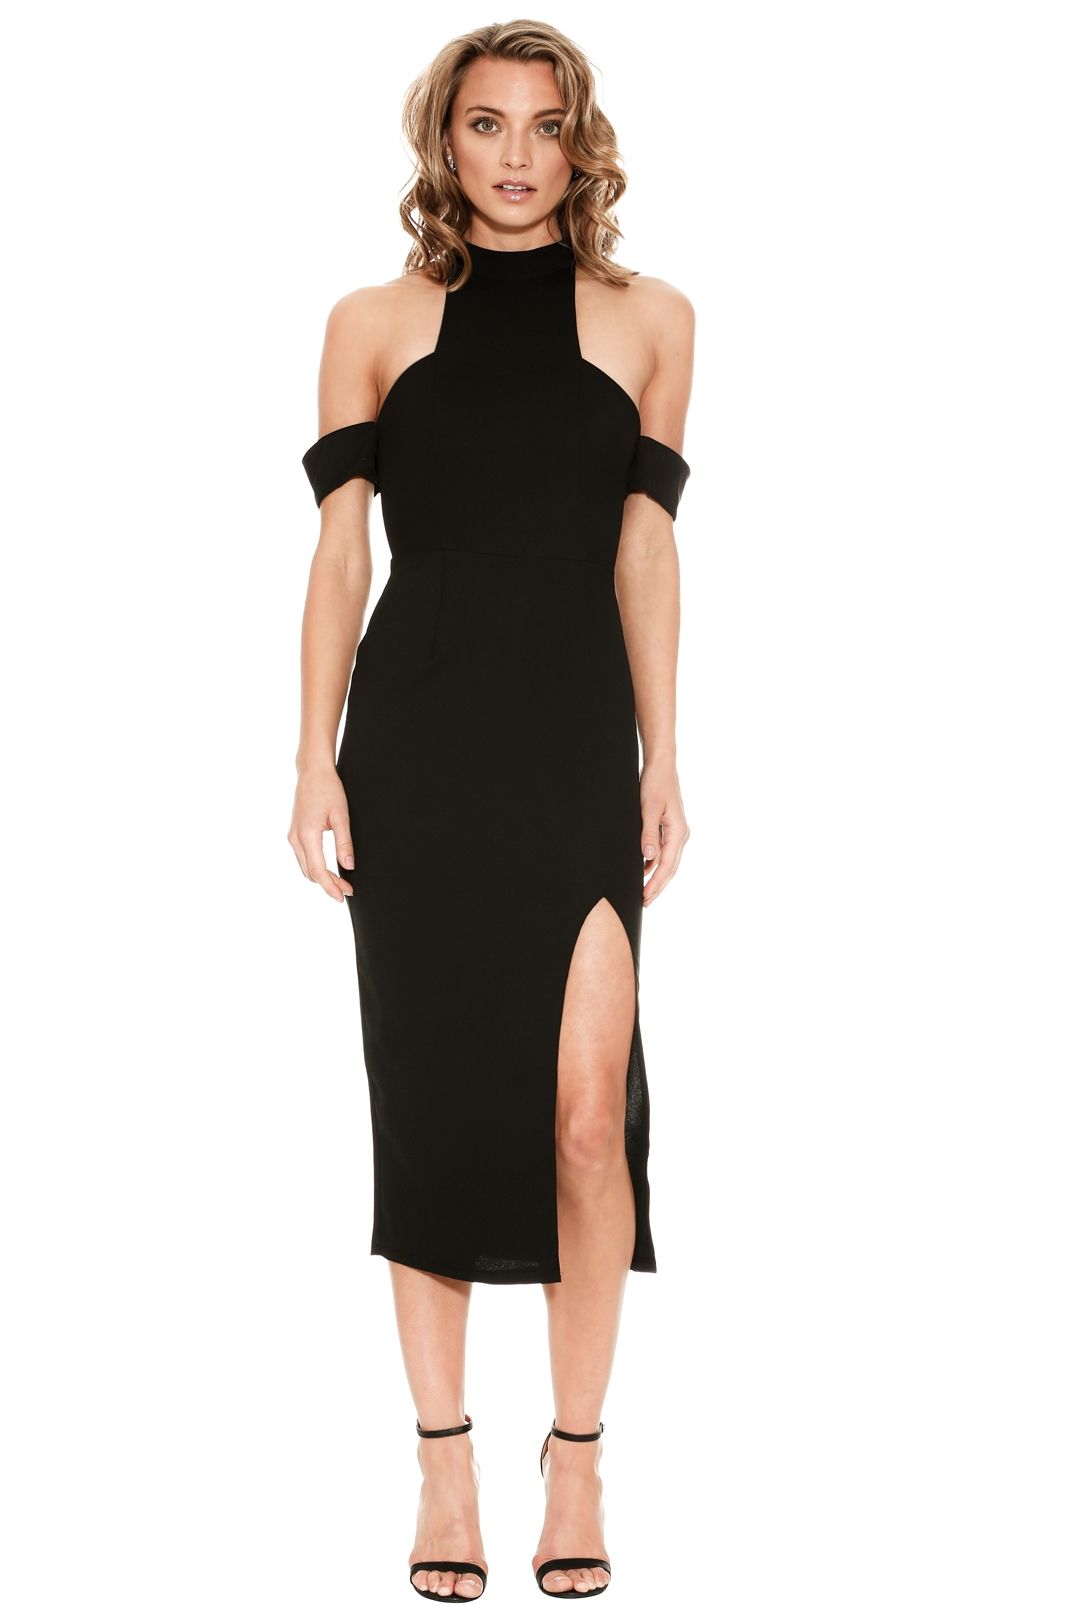 Mossman - The Ring of Fire Dress - Black - Front